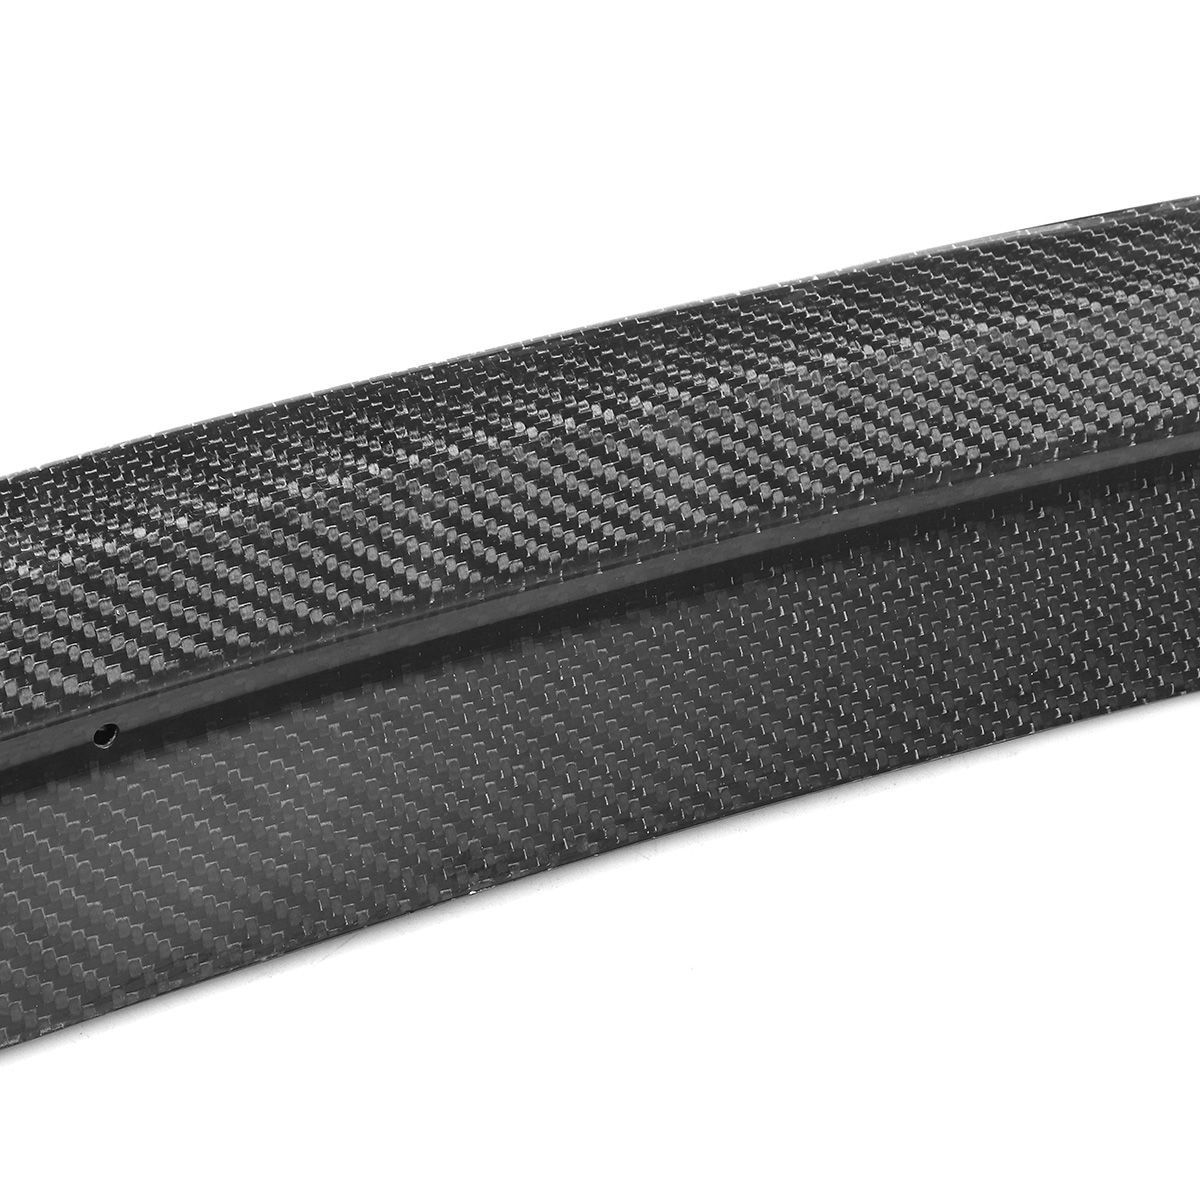 Real-Carbon-Fiber-High-Kick-MP-Style-Trunk-Spoiler-For-BMW-3-Series-2019-2020-1720575